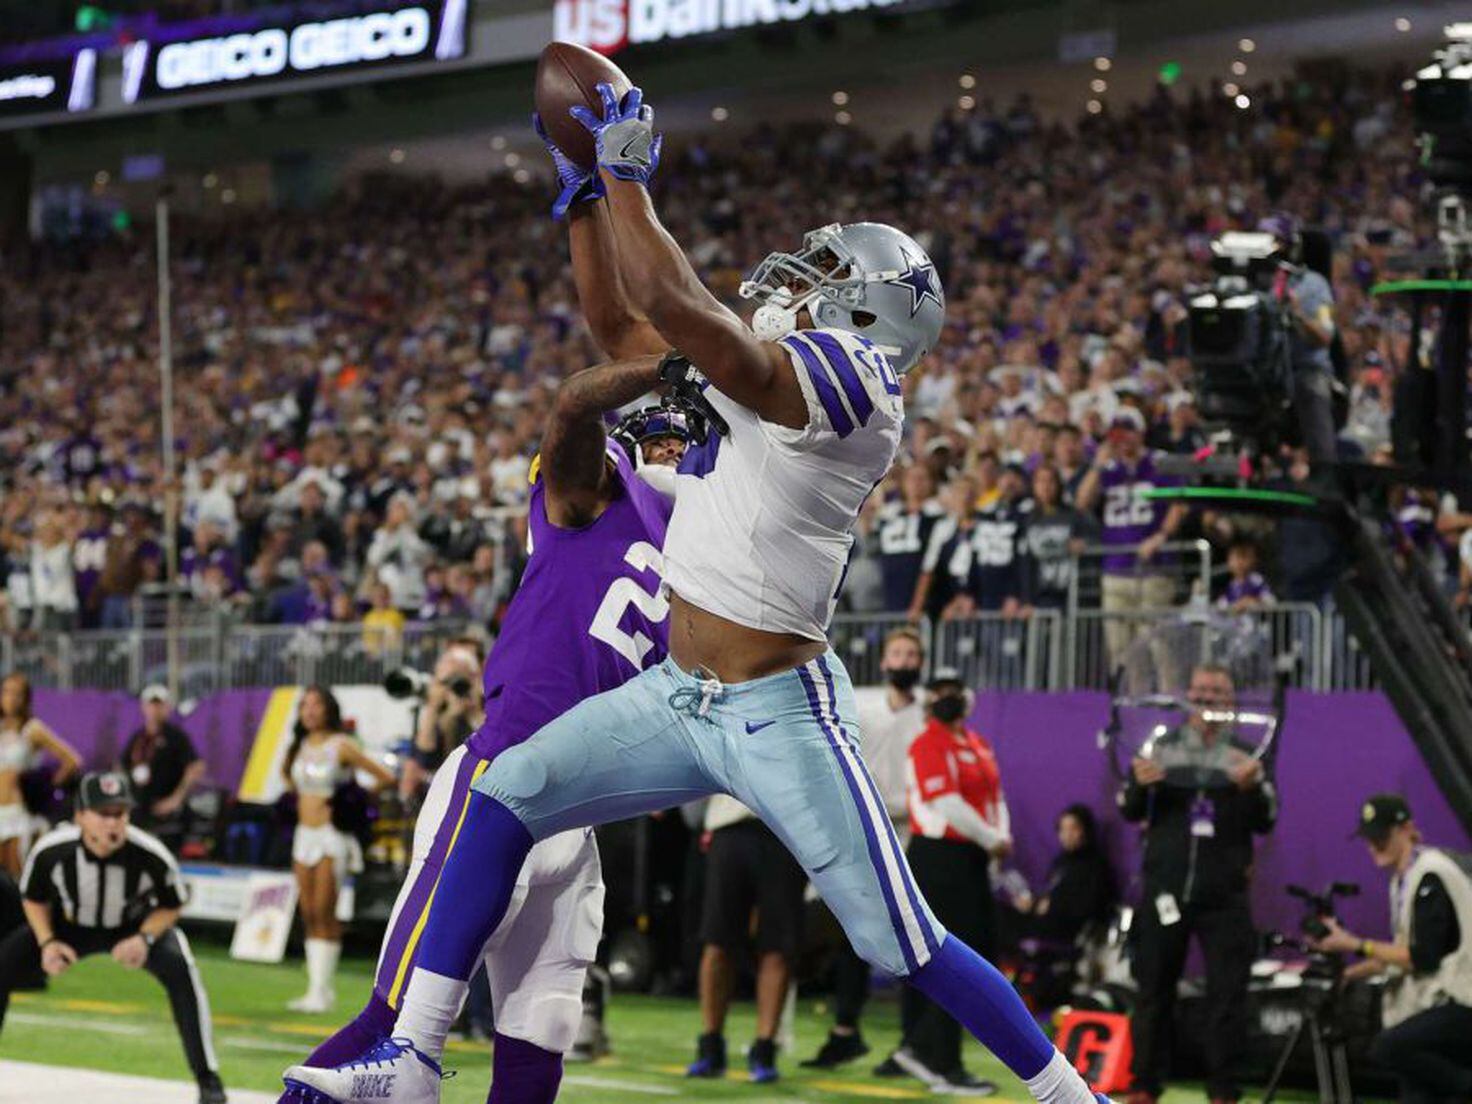 NFL: Cowboys - Vikings: Final score, play-by-play and full highlights